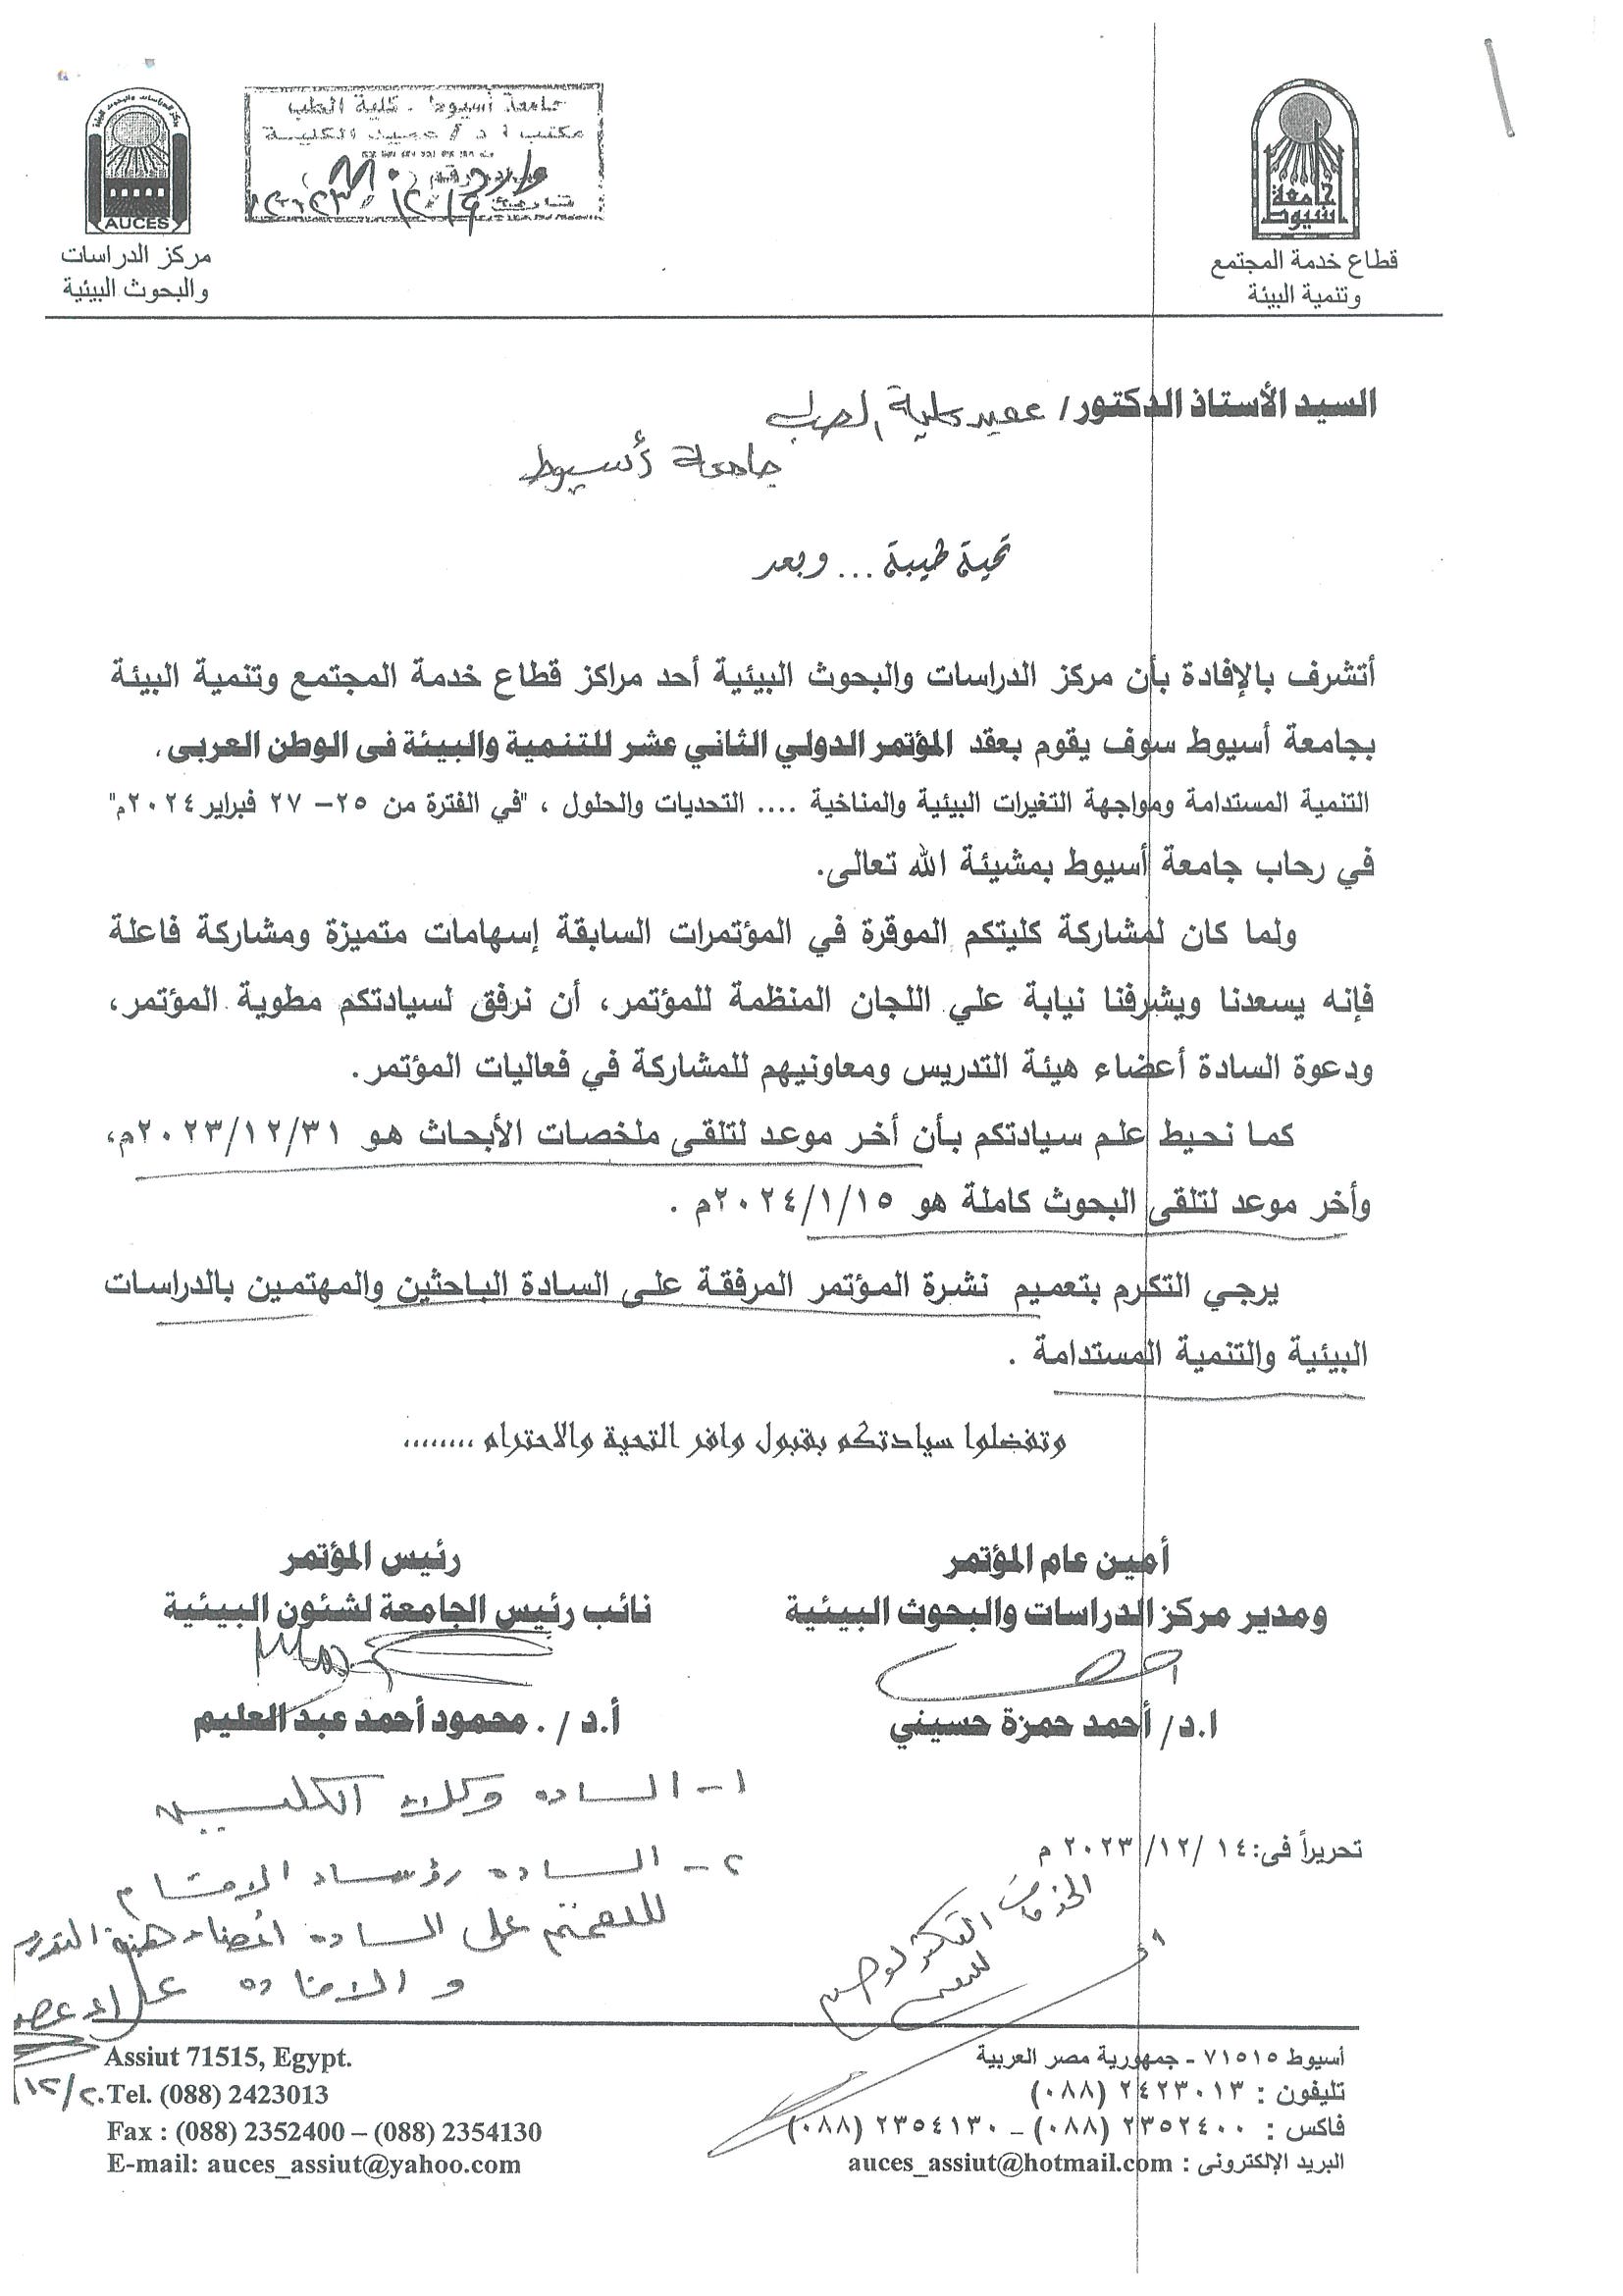 An invitation to participate in the activities of the Twelfth Conference on Development and Environment in the Arab World